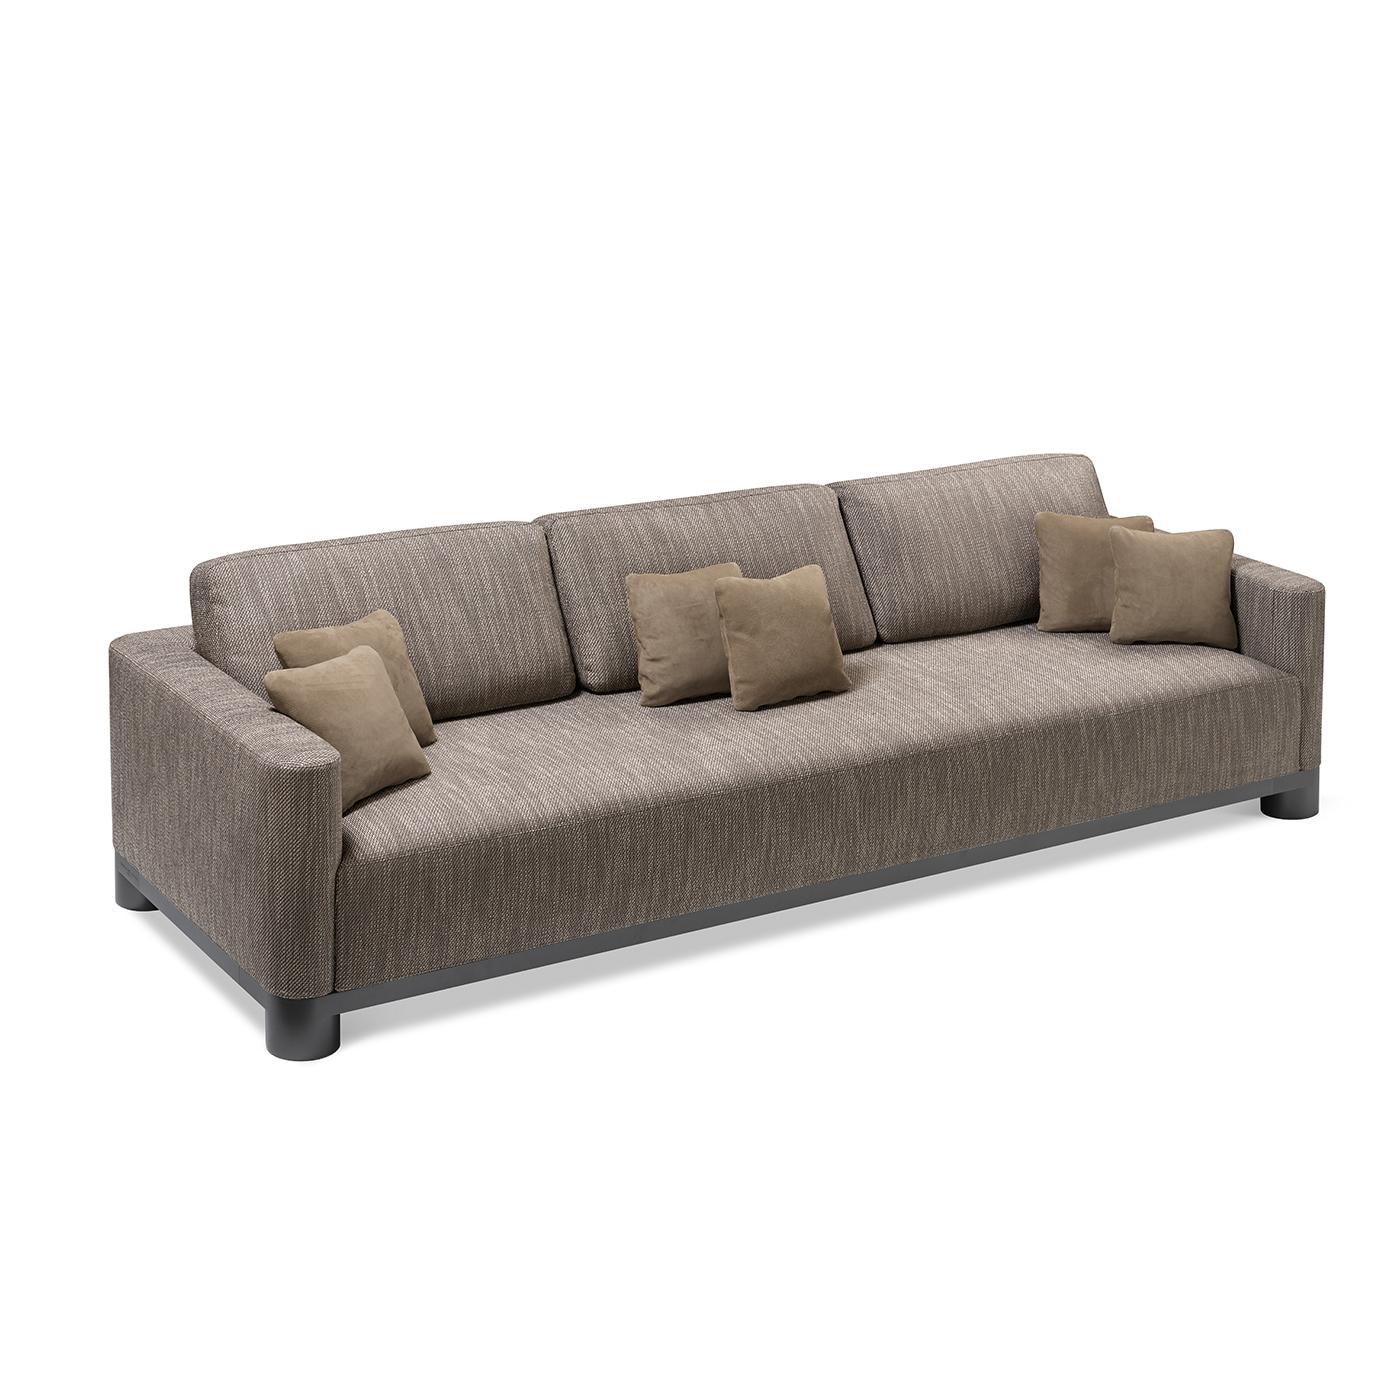 Elegant in its simplicity, this three-seat sofa will make a sophisticated statement in both a modern or contemporary interior. Marked by clean and minimalist lines, it rests on short, cylindrical-shaped feet in black satin-finished brass, and